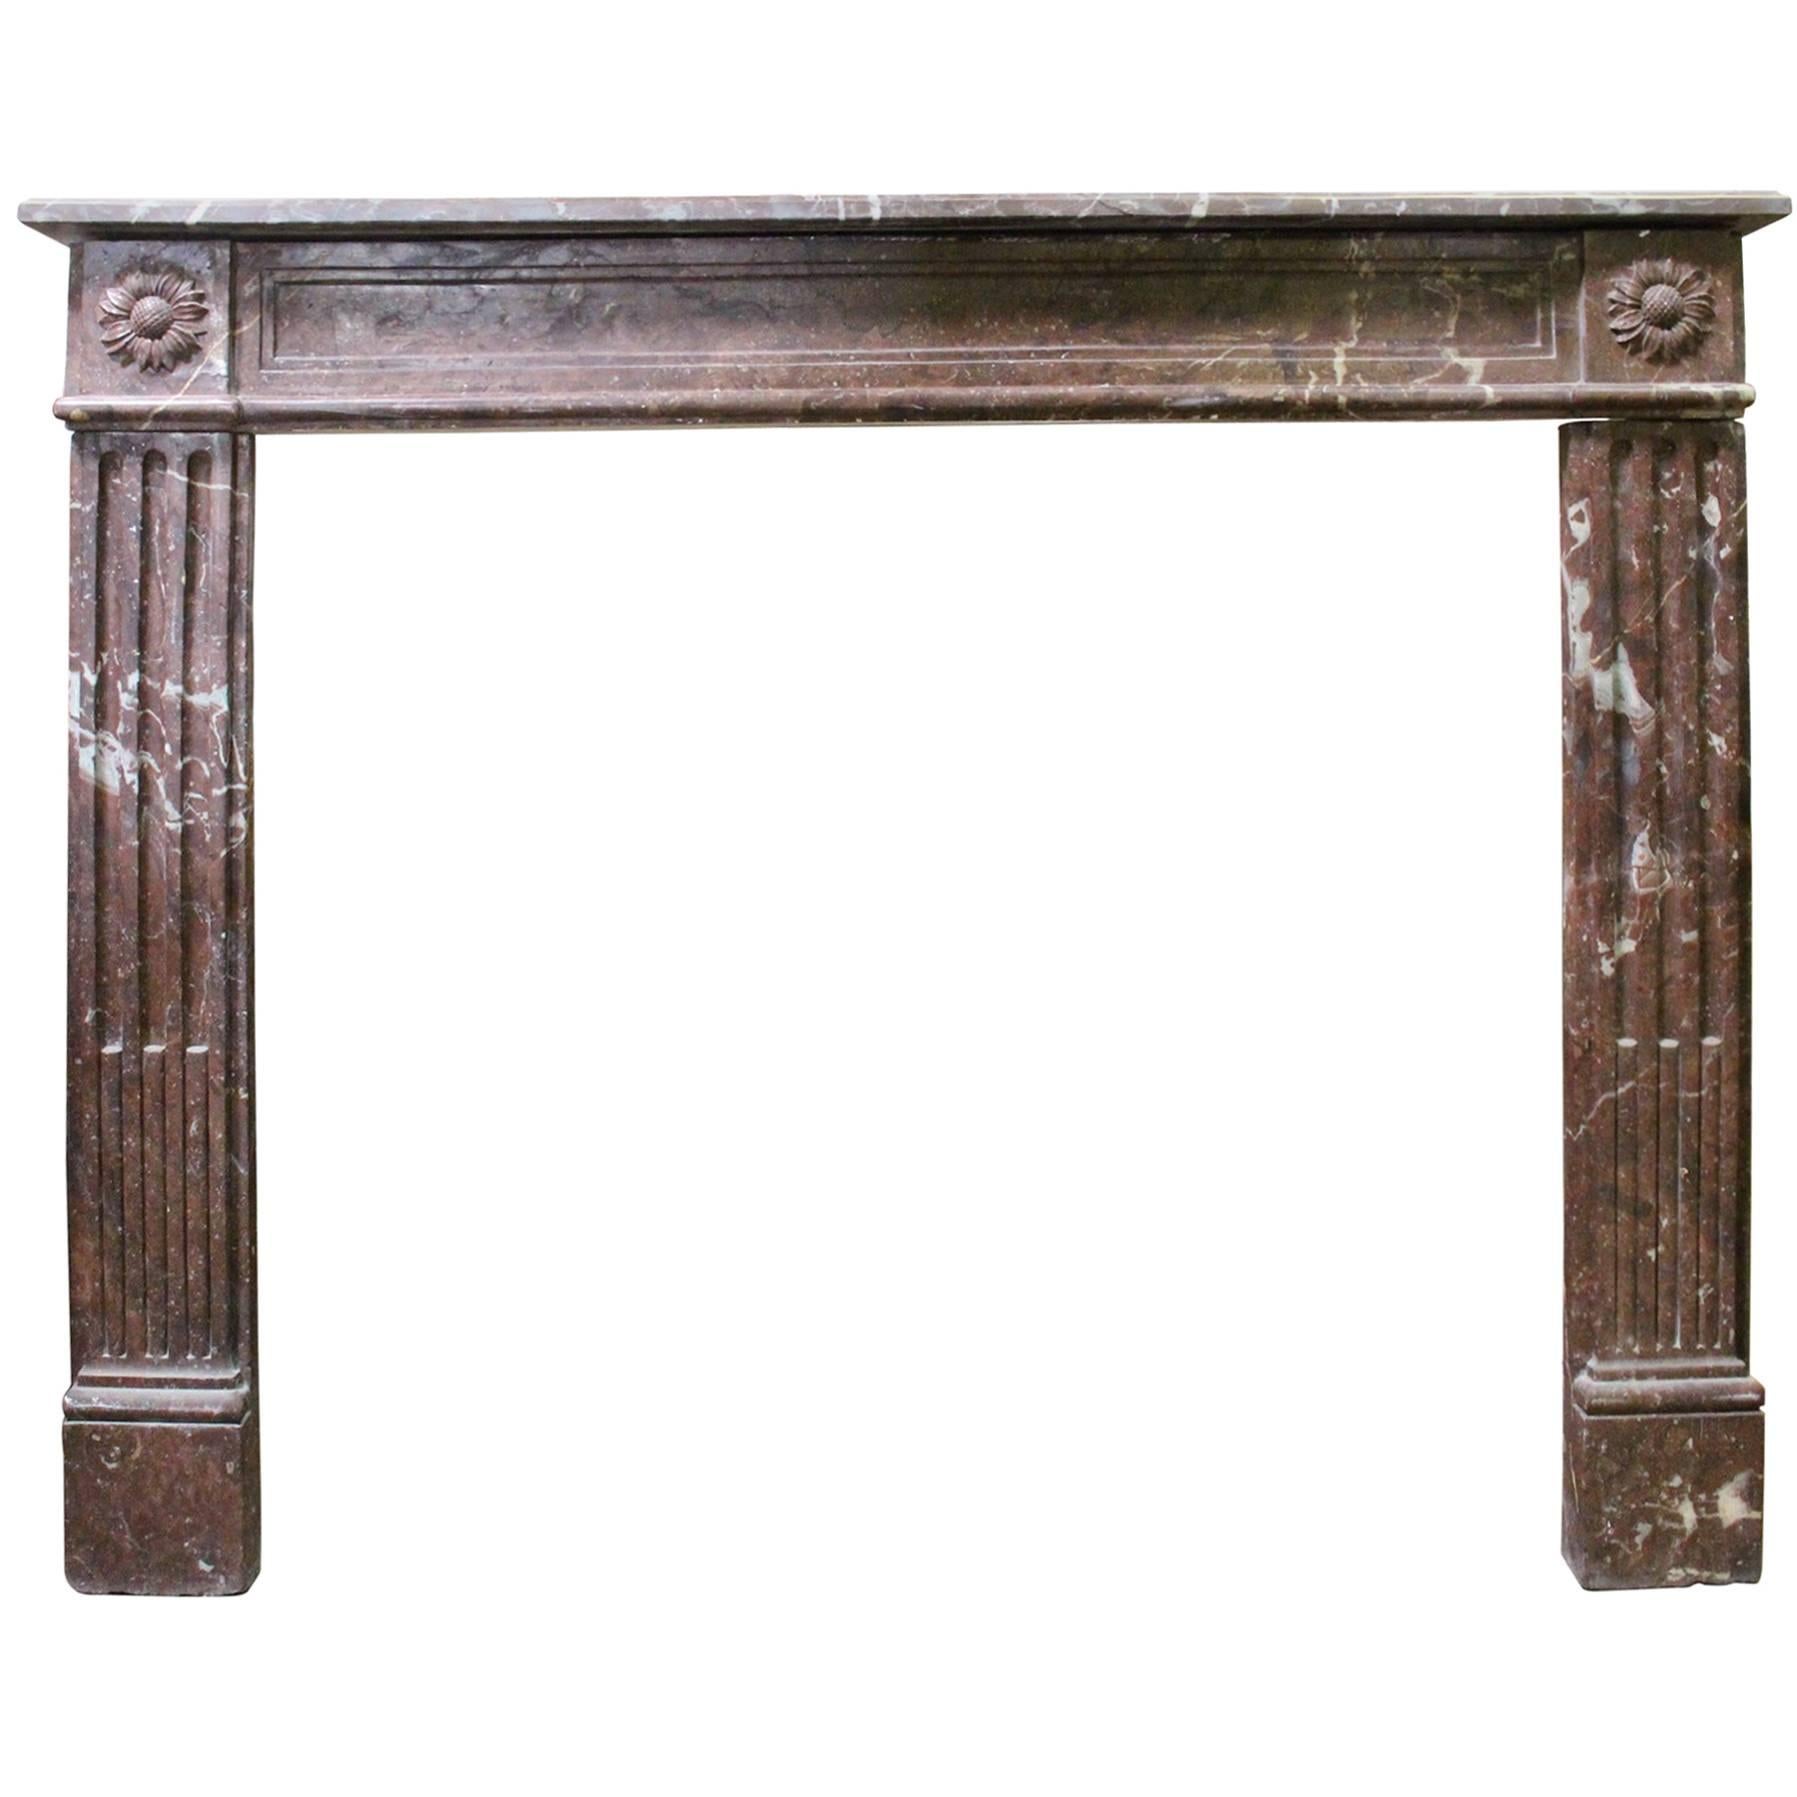 French Louis XVI Style Marble Mantel with a Sunflower Motif